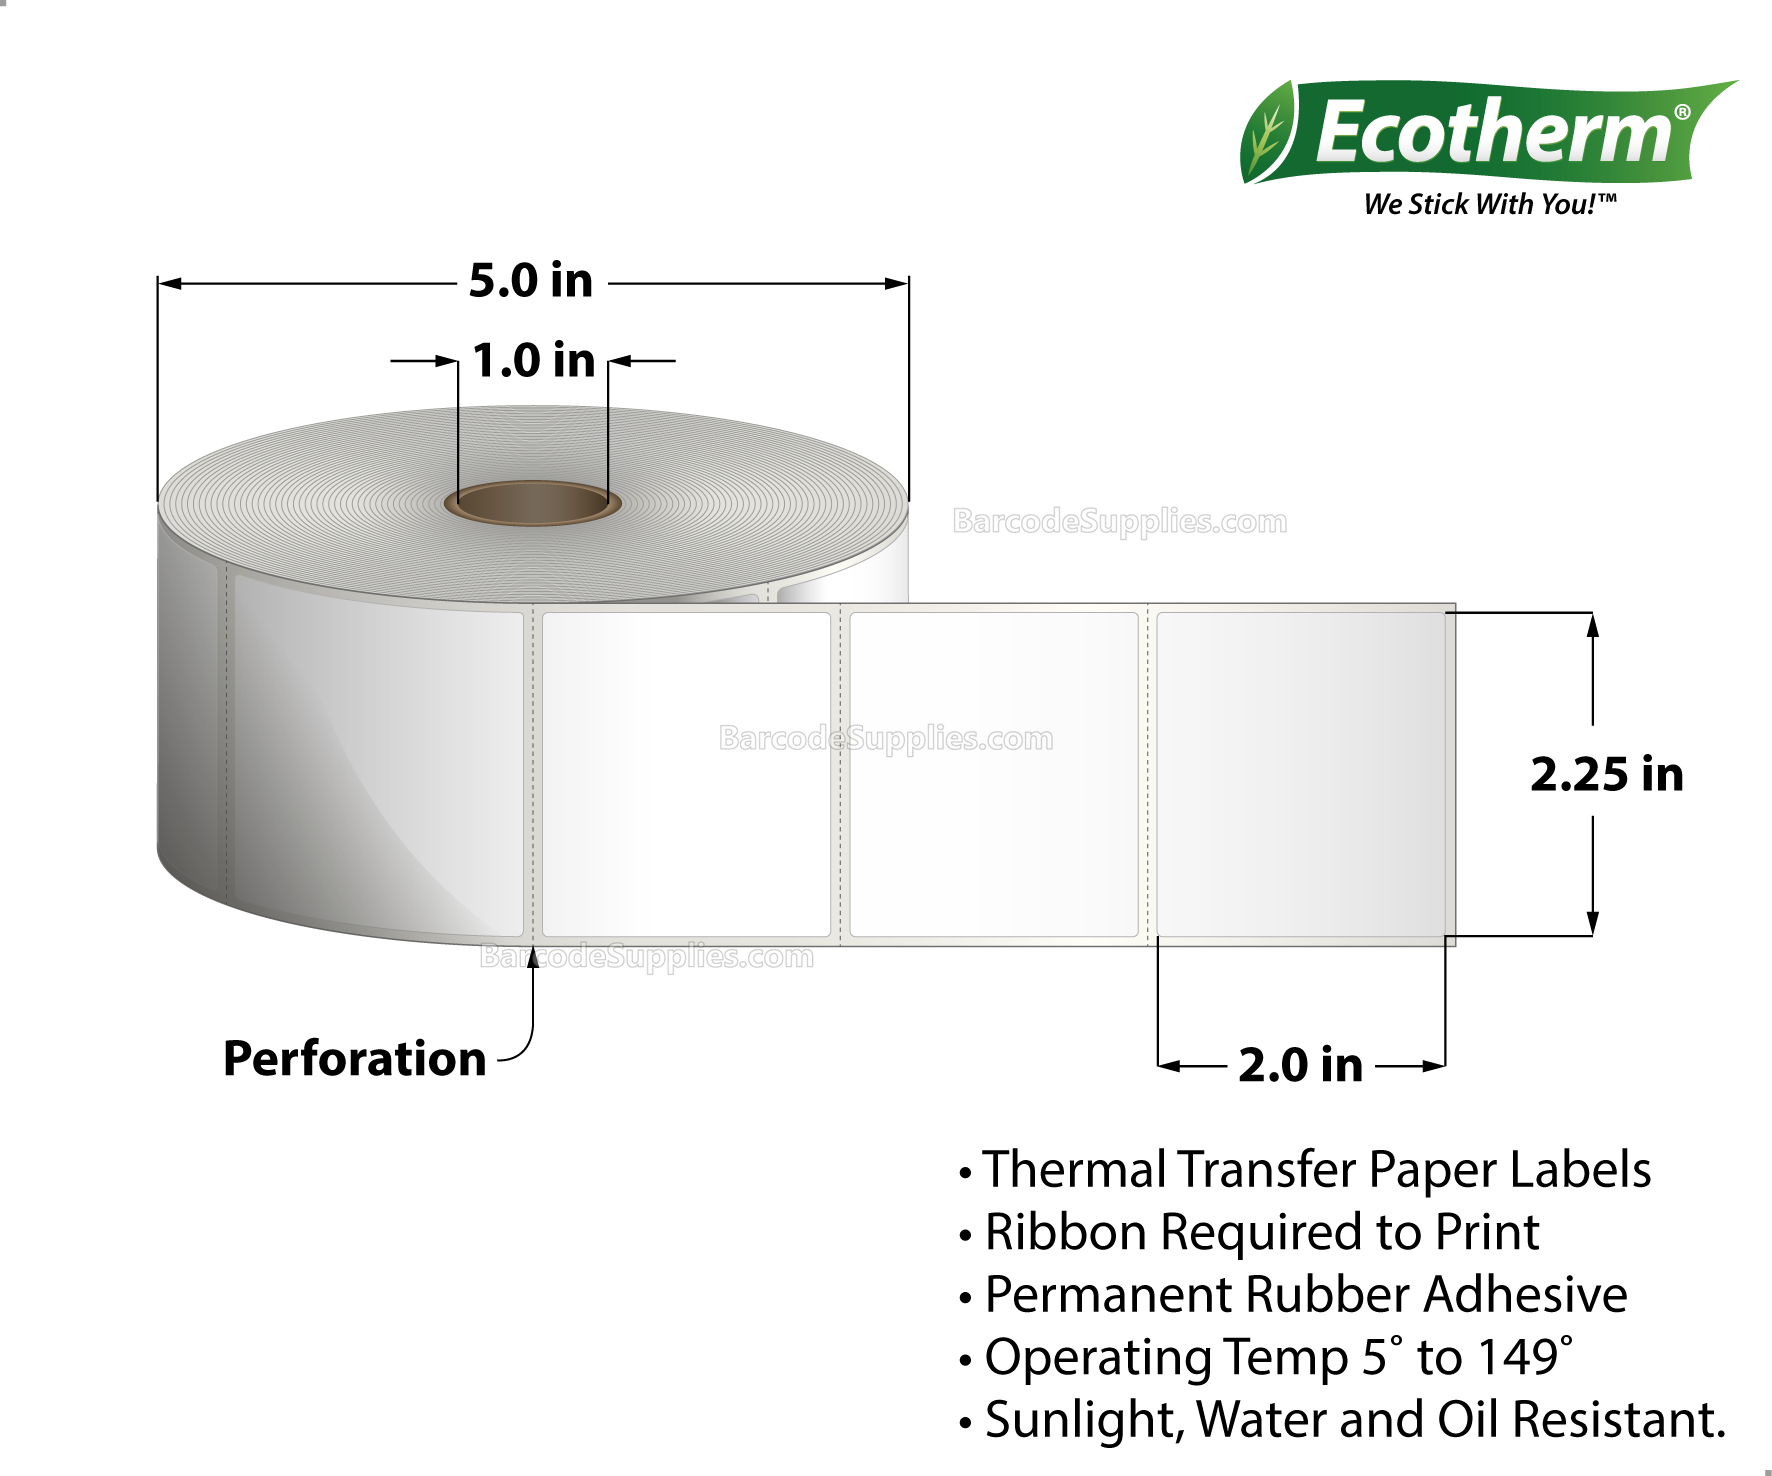 2.25 x 2 Thermal Transfer White Labels With Rubber Adhesive - Perforated - 1370 Labels Per Roll - Carton Of 6 Rolls - 8220 Labels Total - MPN: ECOTHERM25126-6